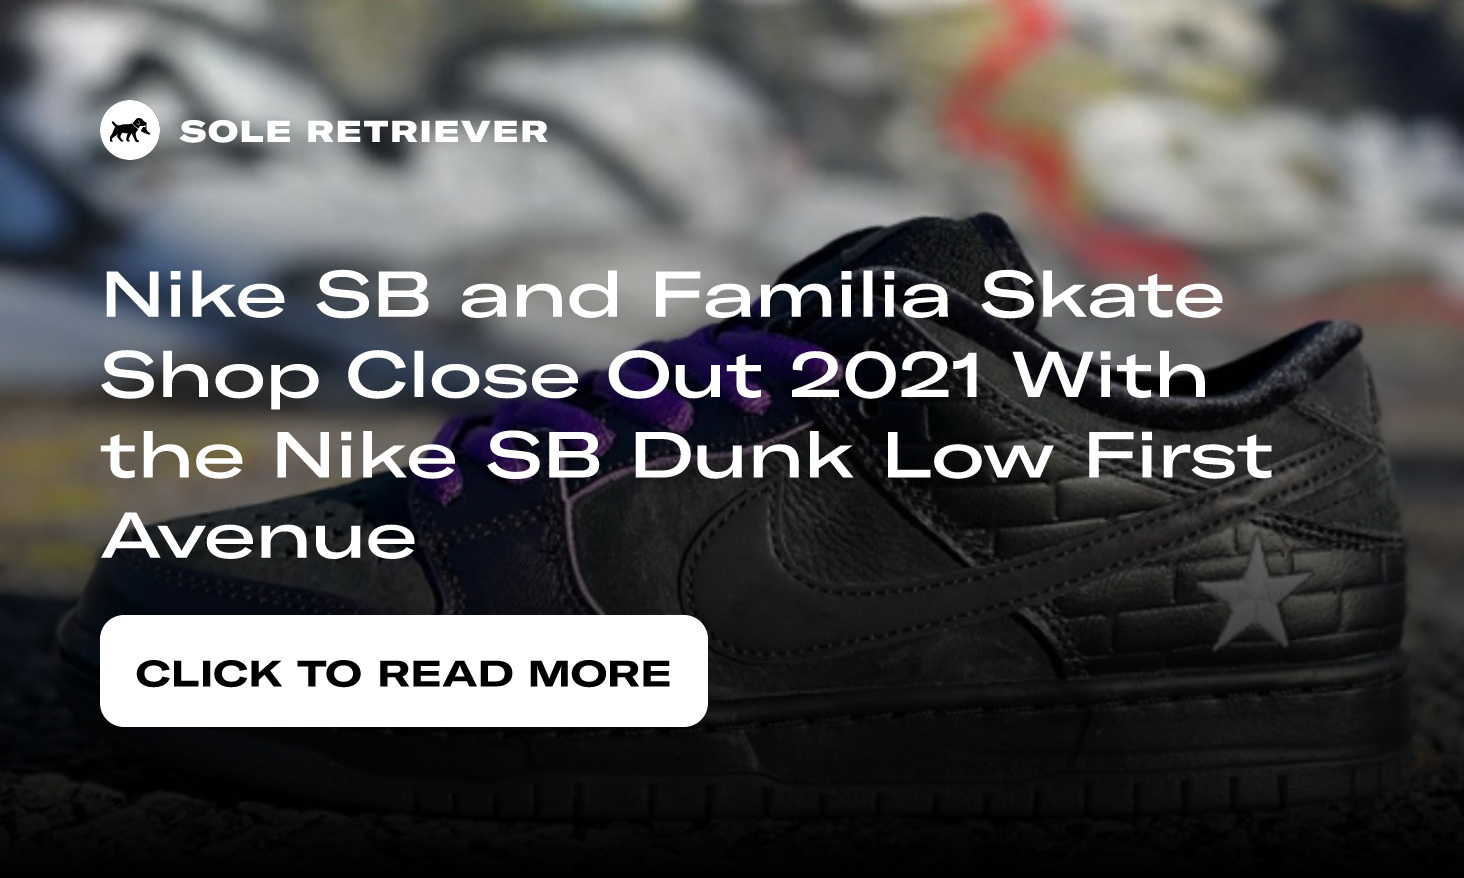 Where to Buy the Familia x Nike SB Dunk Low First Avenue